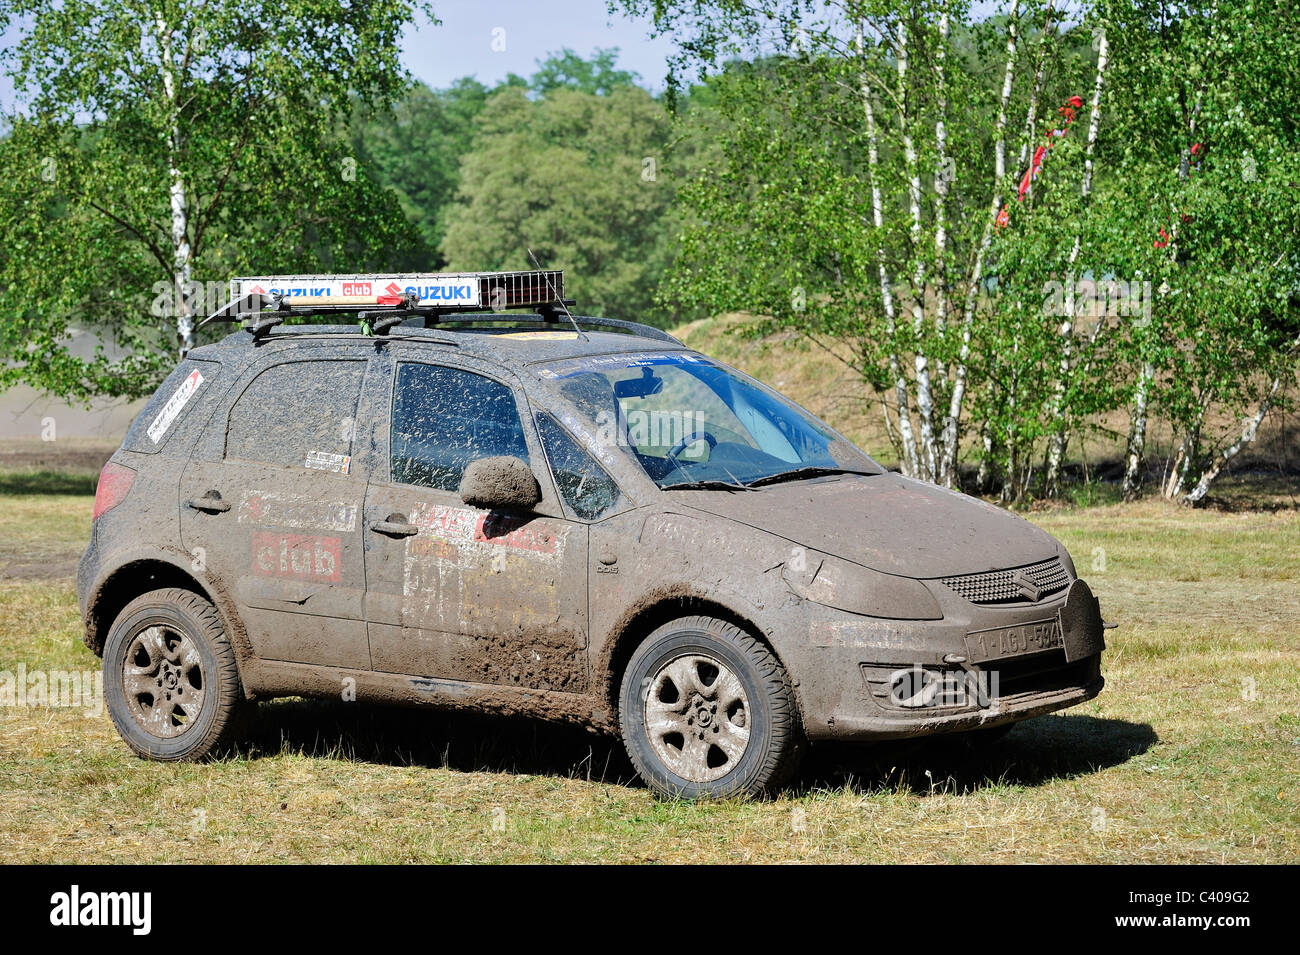 suzuki sx4 four wheel drive off road vehicle covered in mud after stock photo alamy